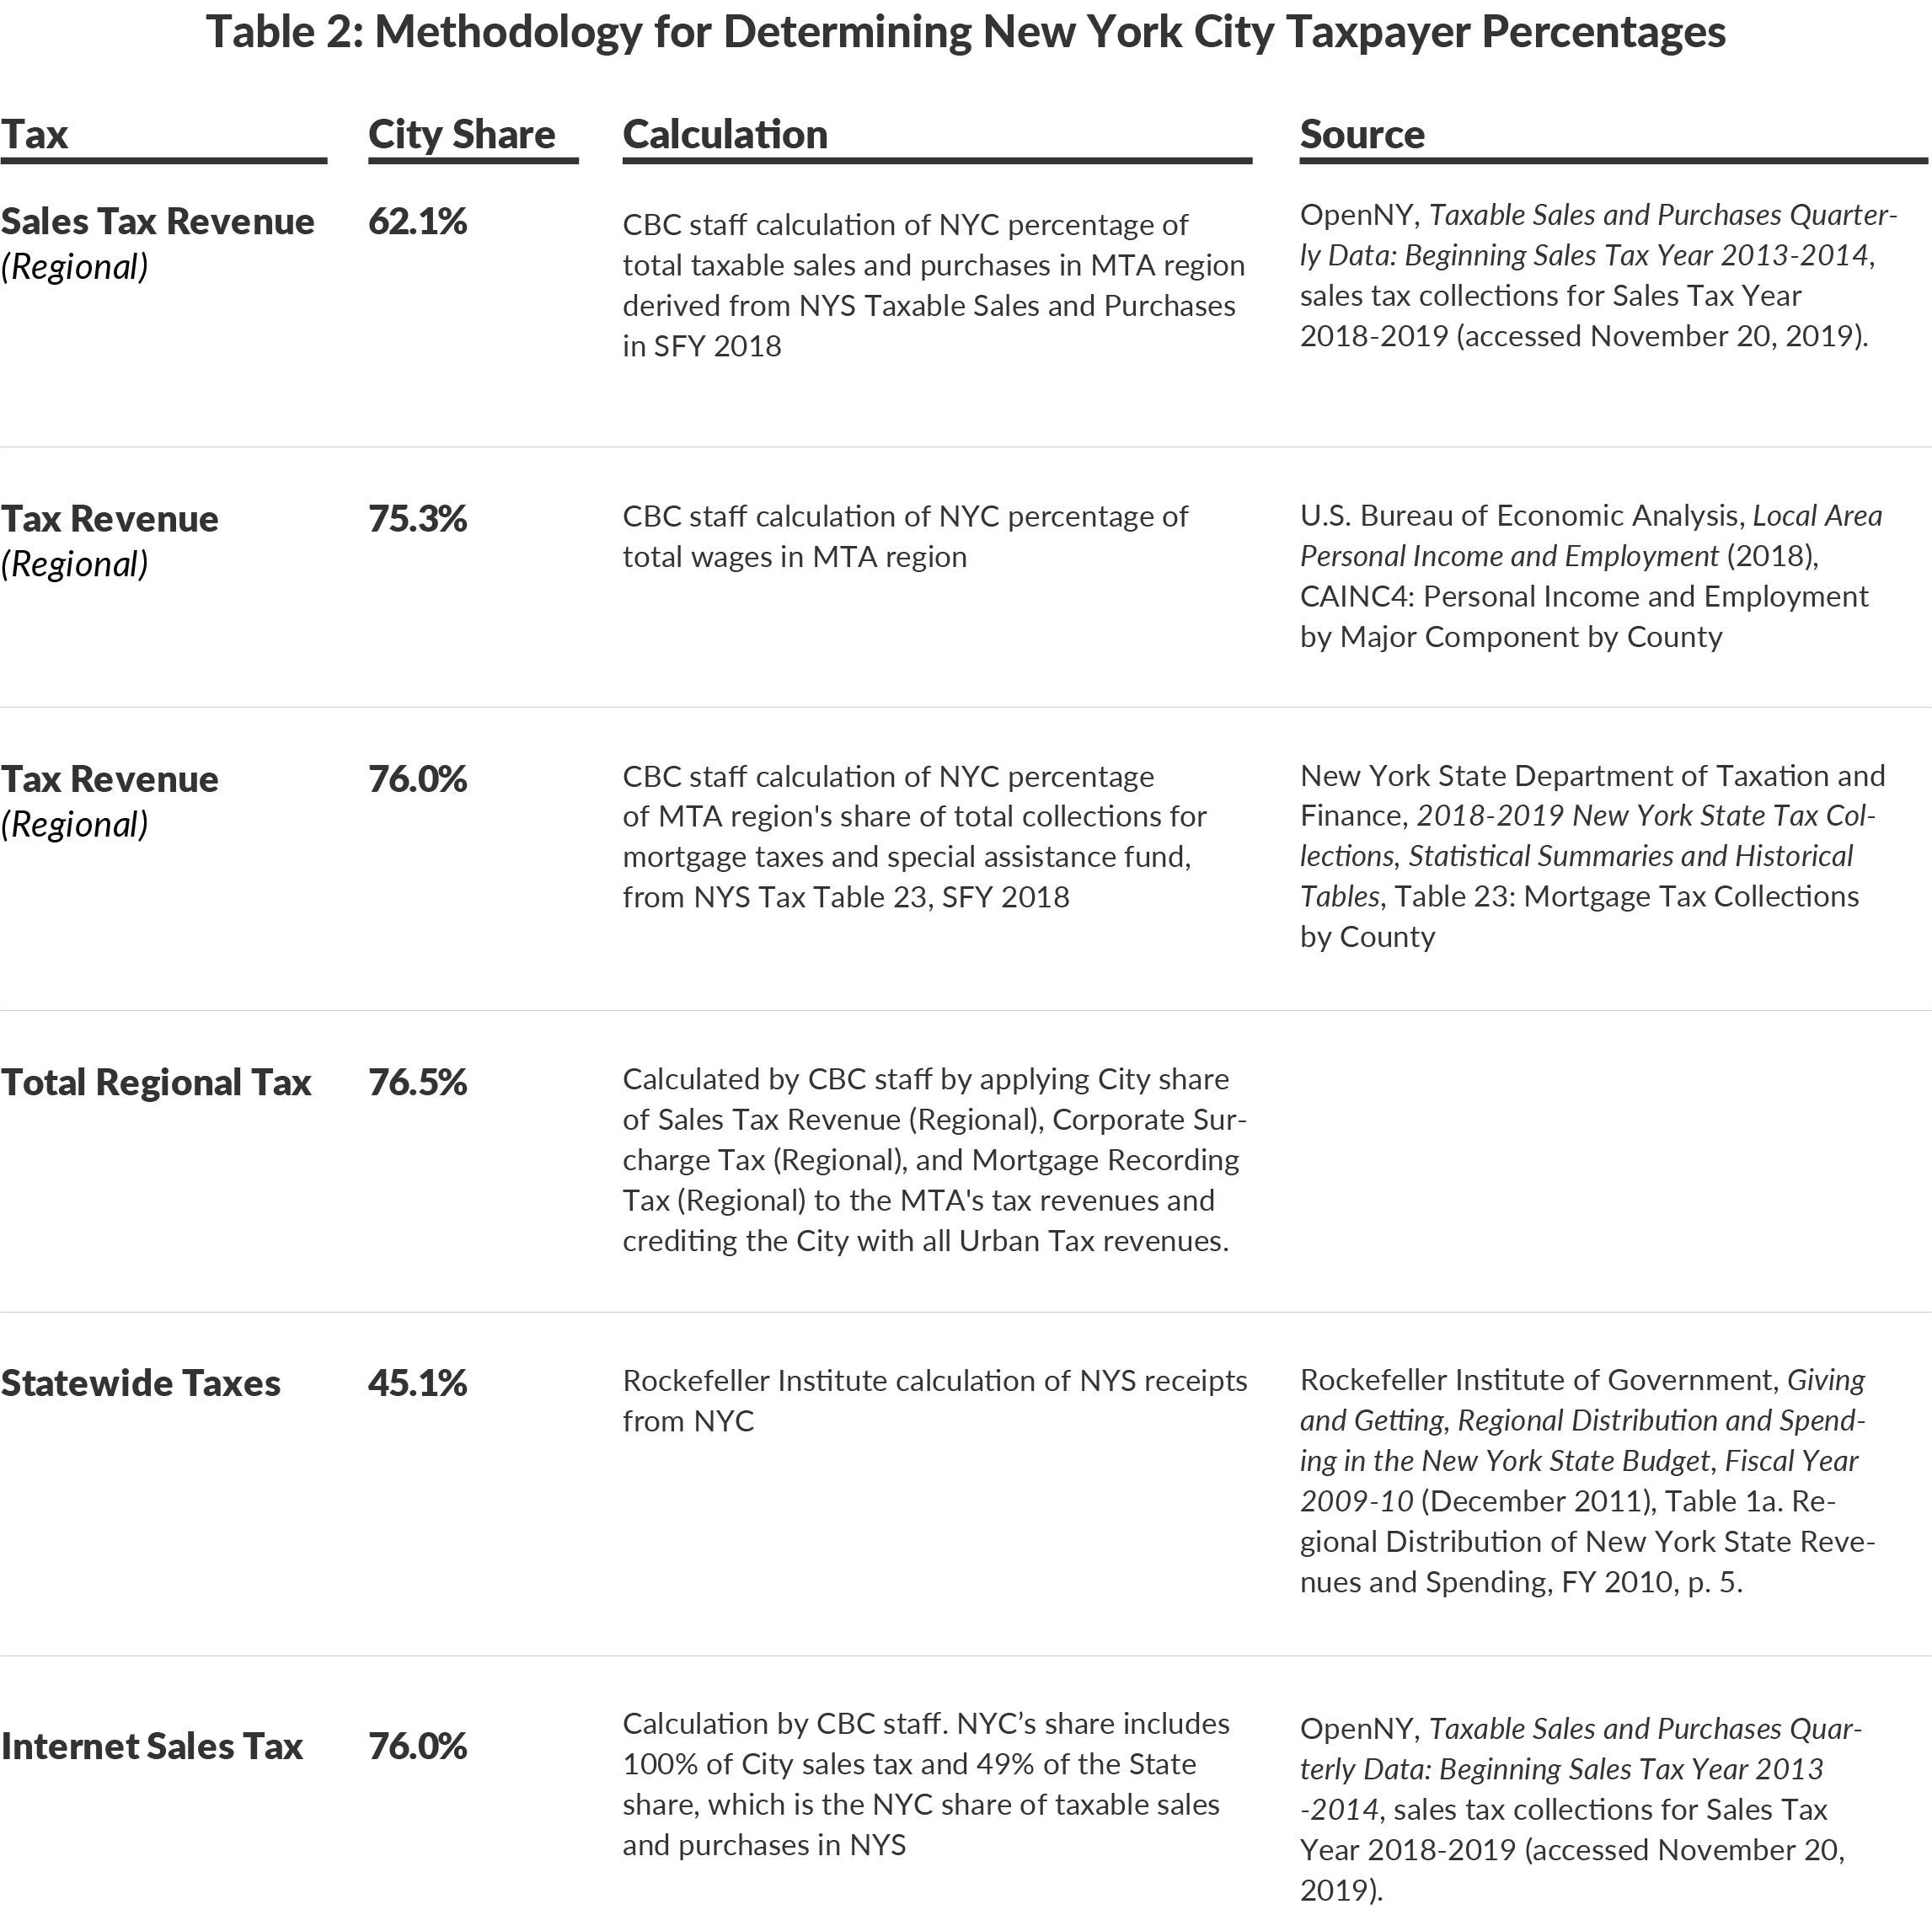 Table 2: Methodology for Determining New York City Taxpayer Percentages